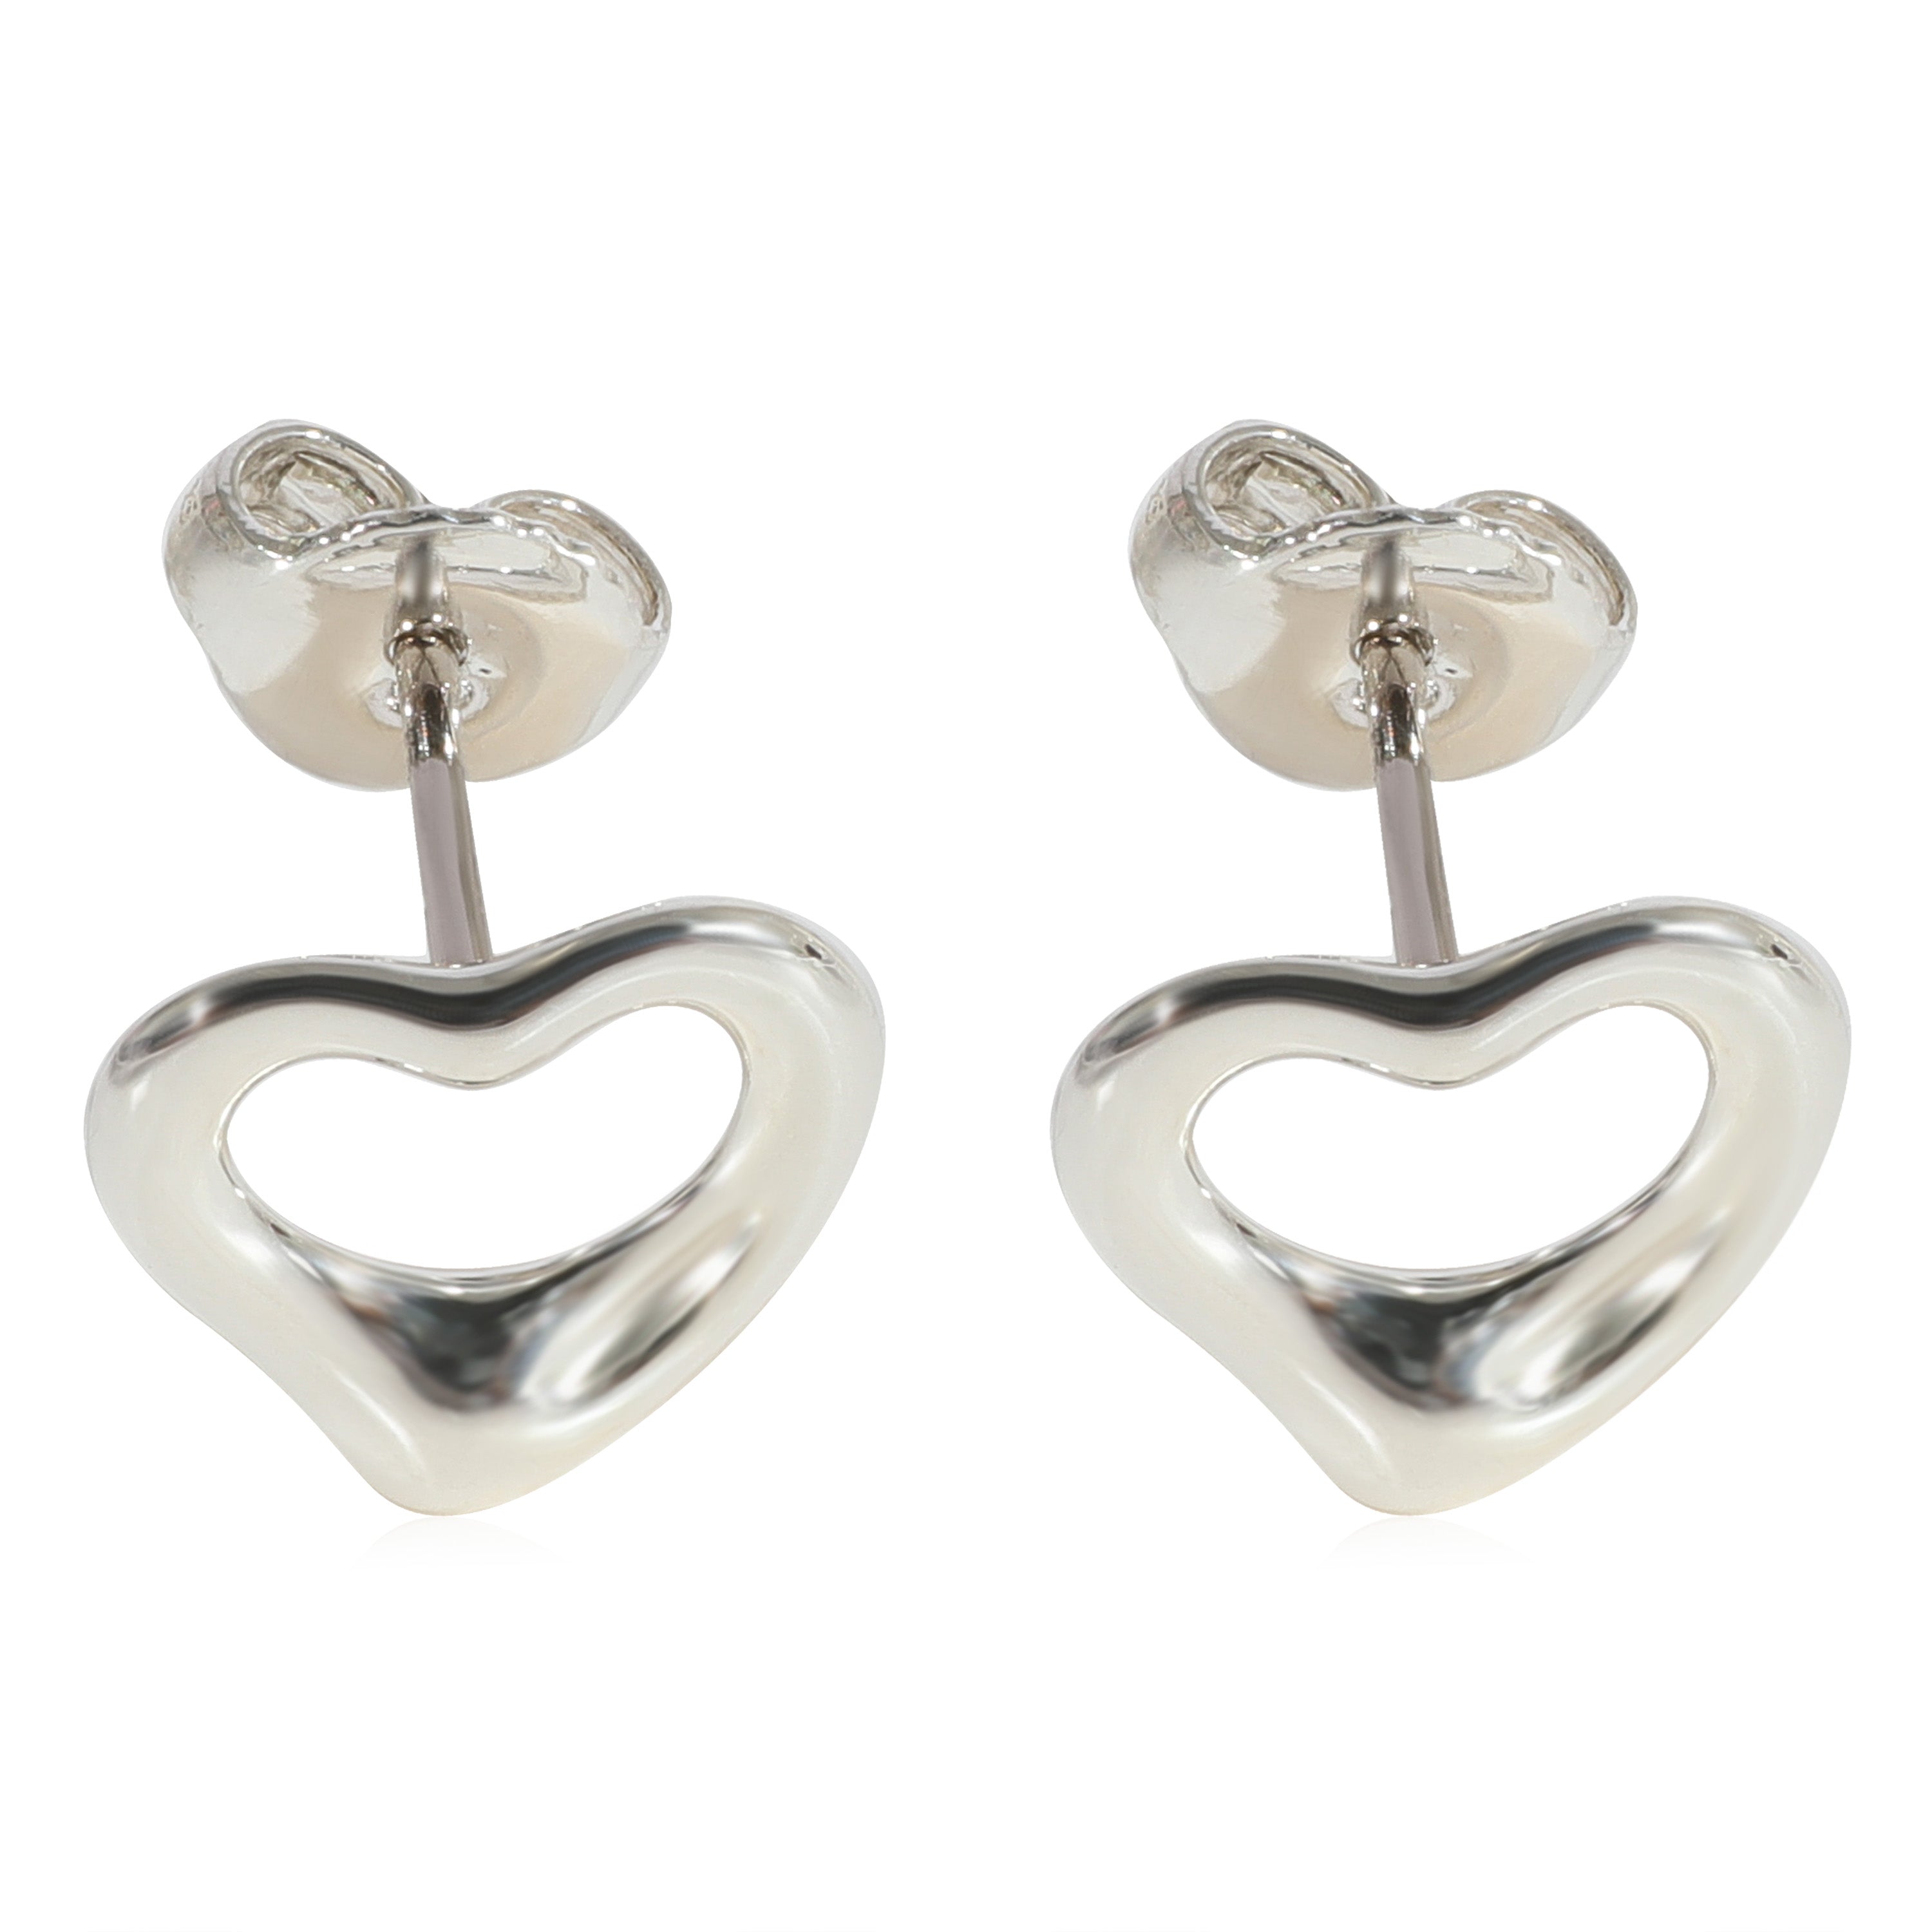 Sold at Auction: ITALIAN TIFFANY STERLING SILVER OPEN HEART STUD EARRING